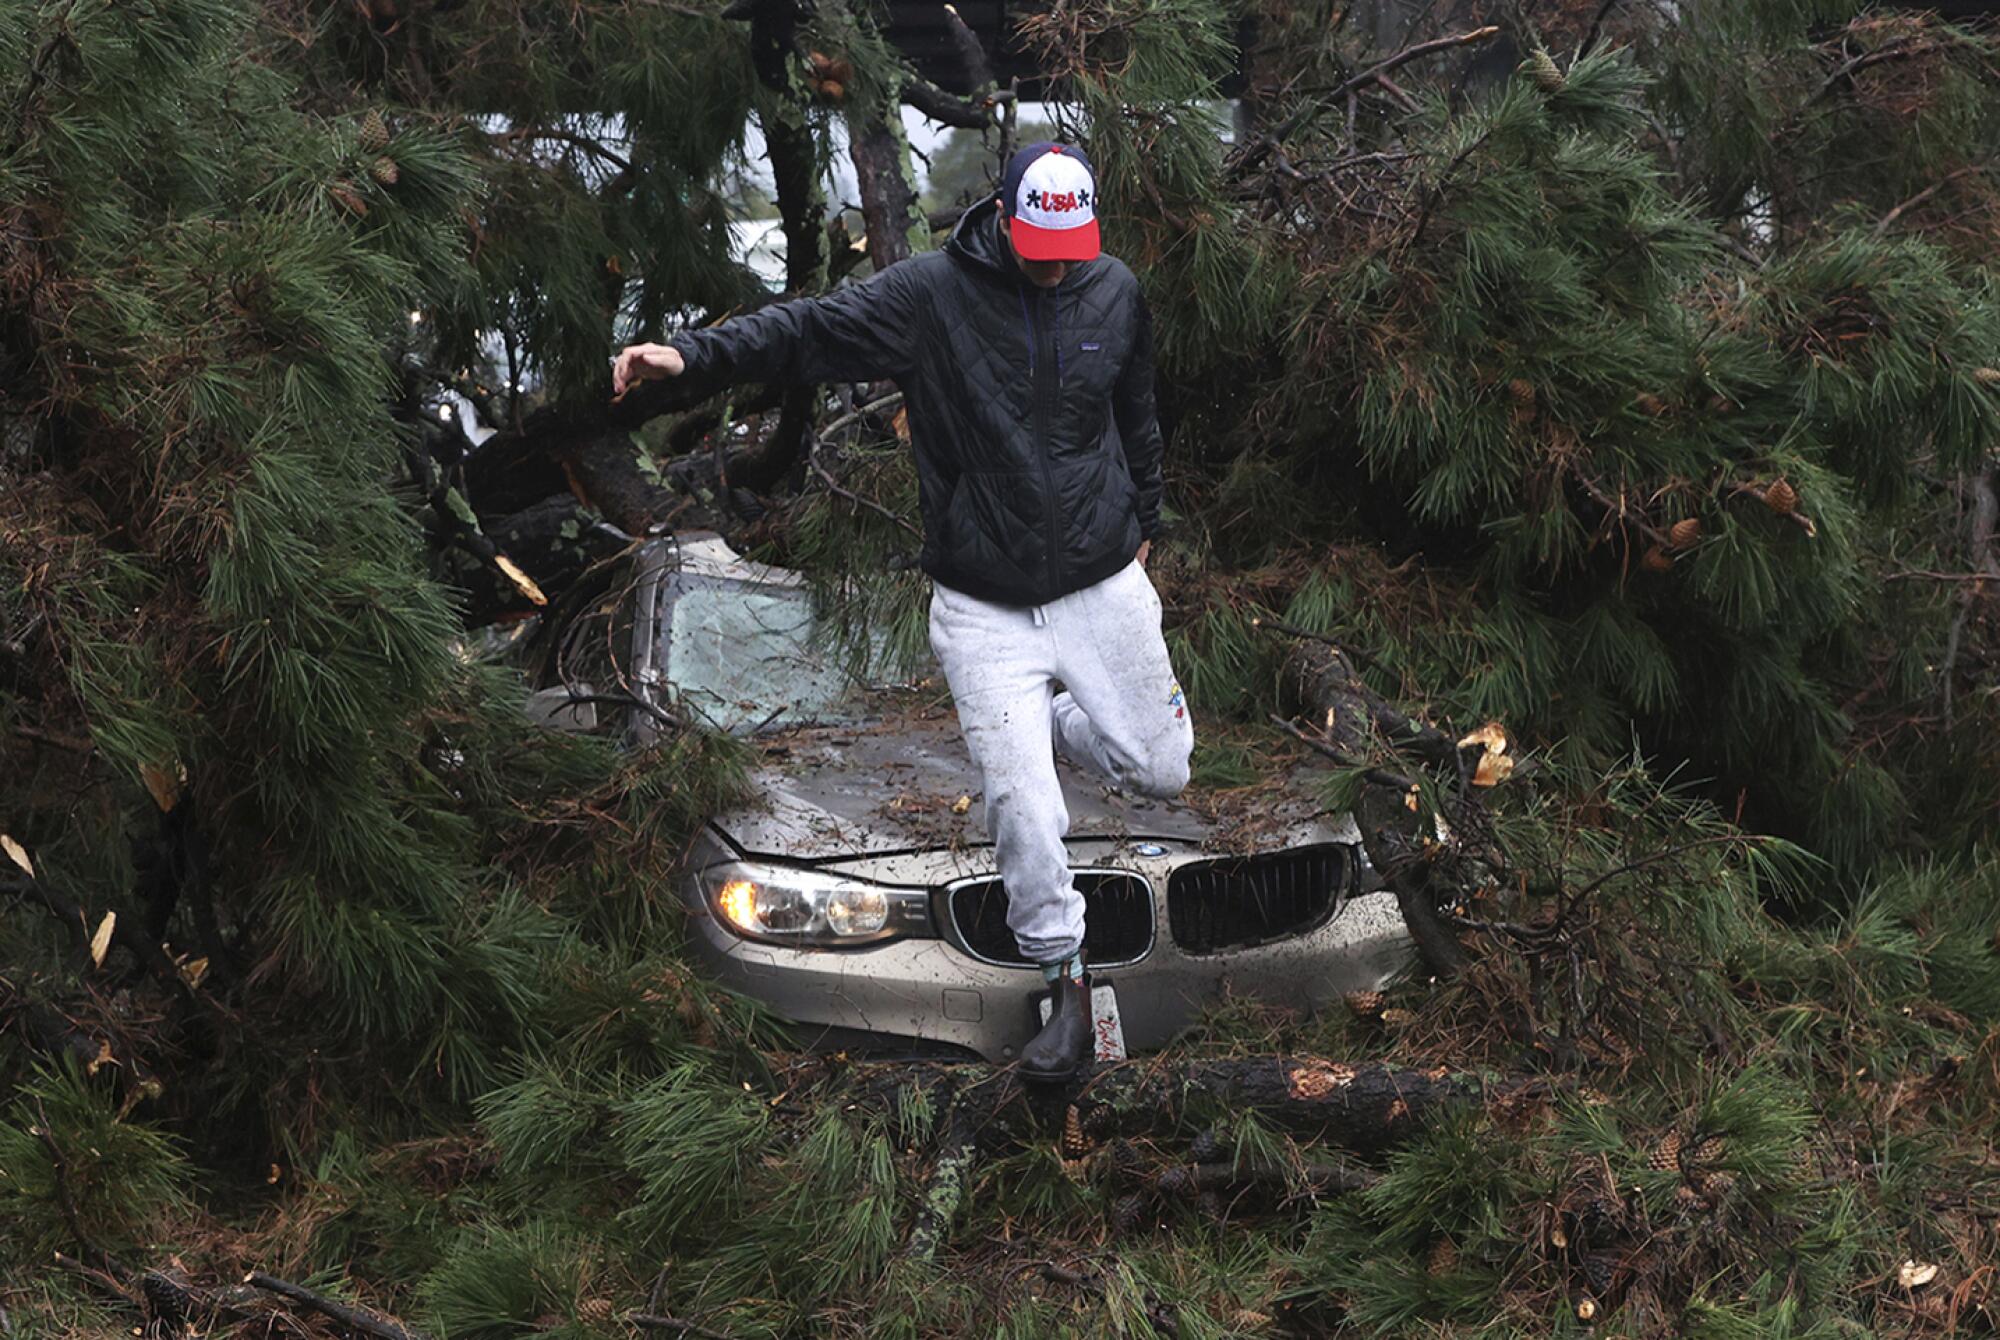 Boone White leaps from his car after a large tree fell on it while he was driving near Capitola, Calif., on Thursday.